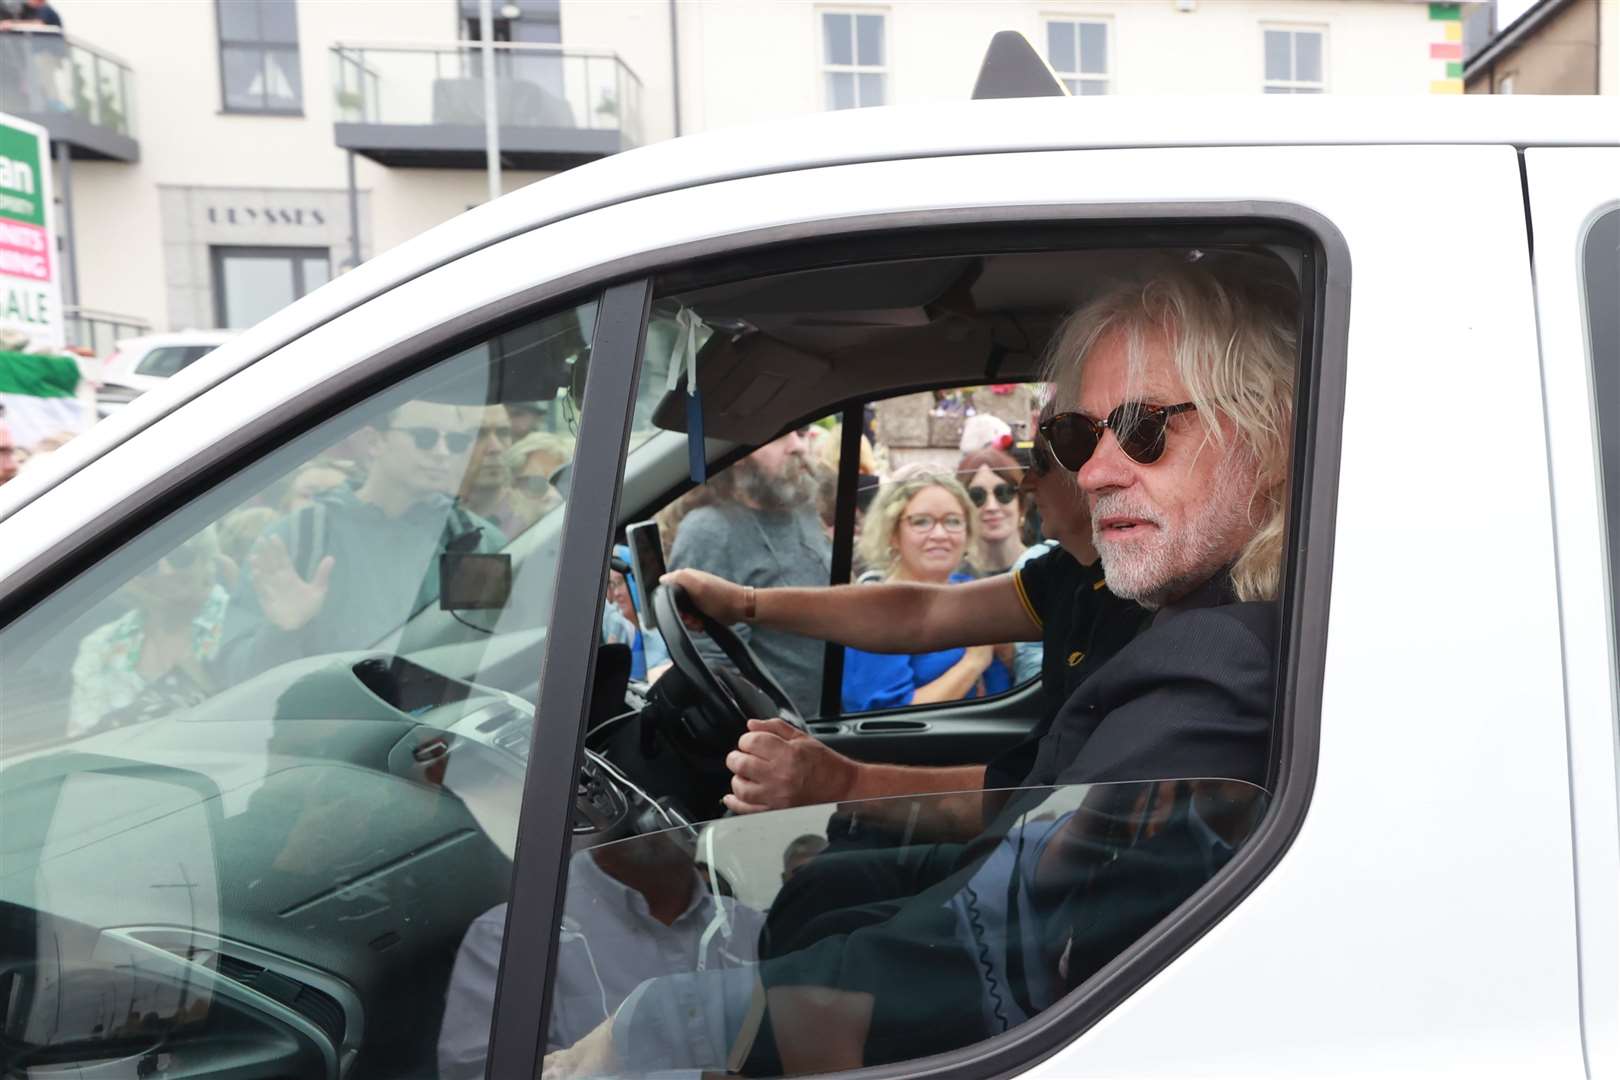 Bob Geldof rides in a taxi as part of the funeral cortege for Sinead O’Connor as the procession passes through Bray, Co Wicklow (Liam McBurney/PA)